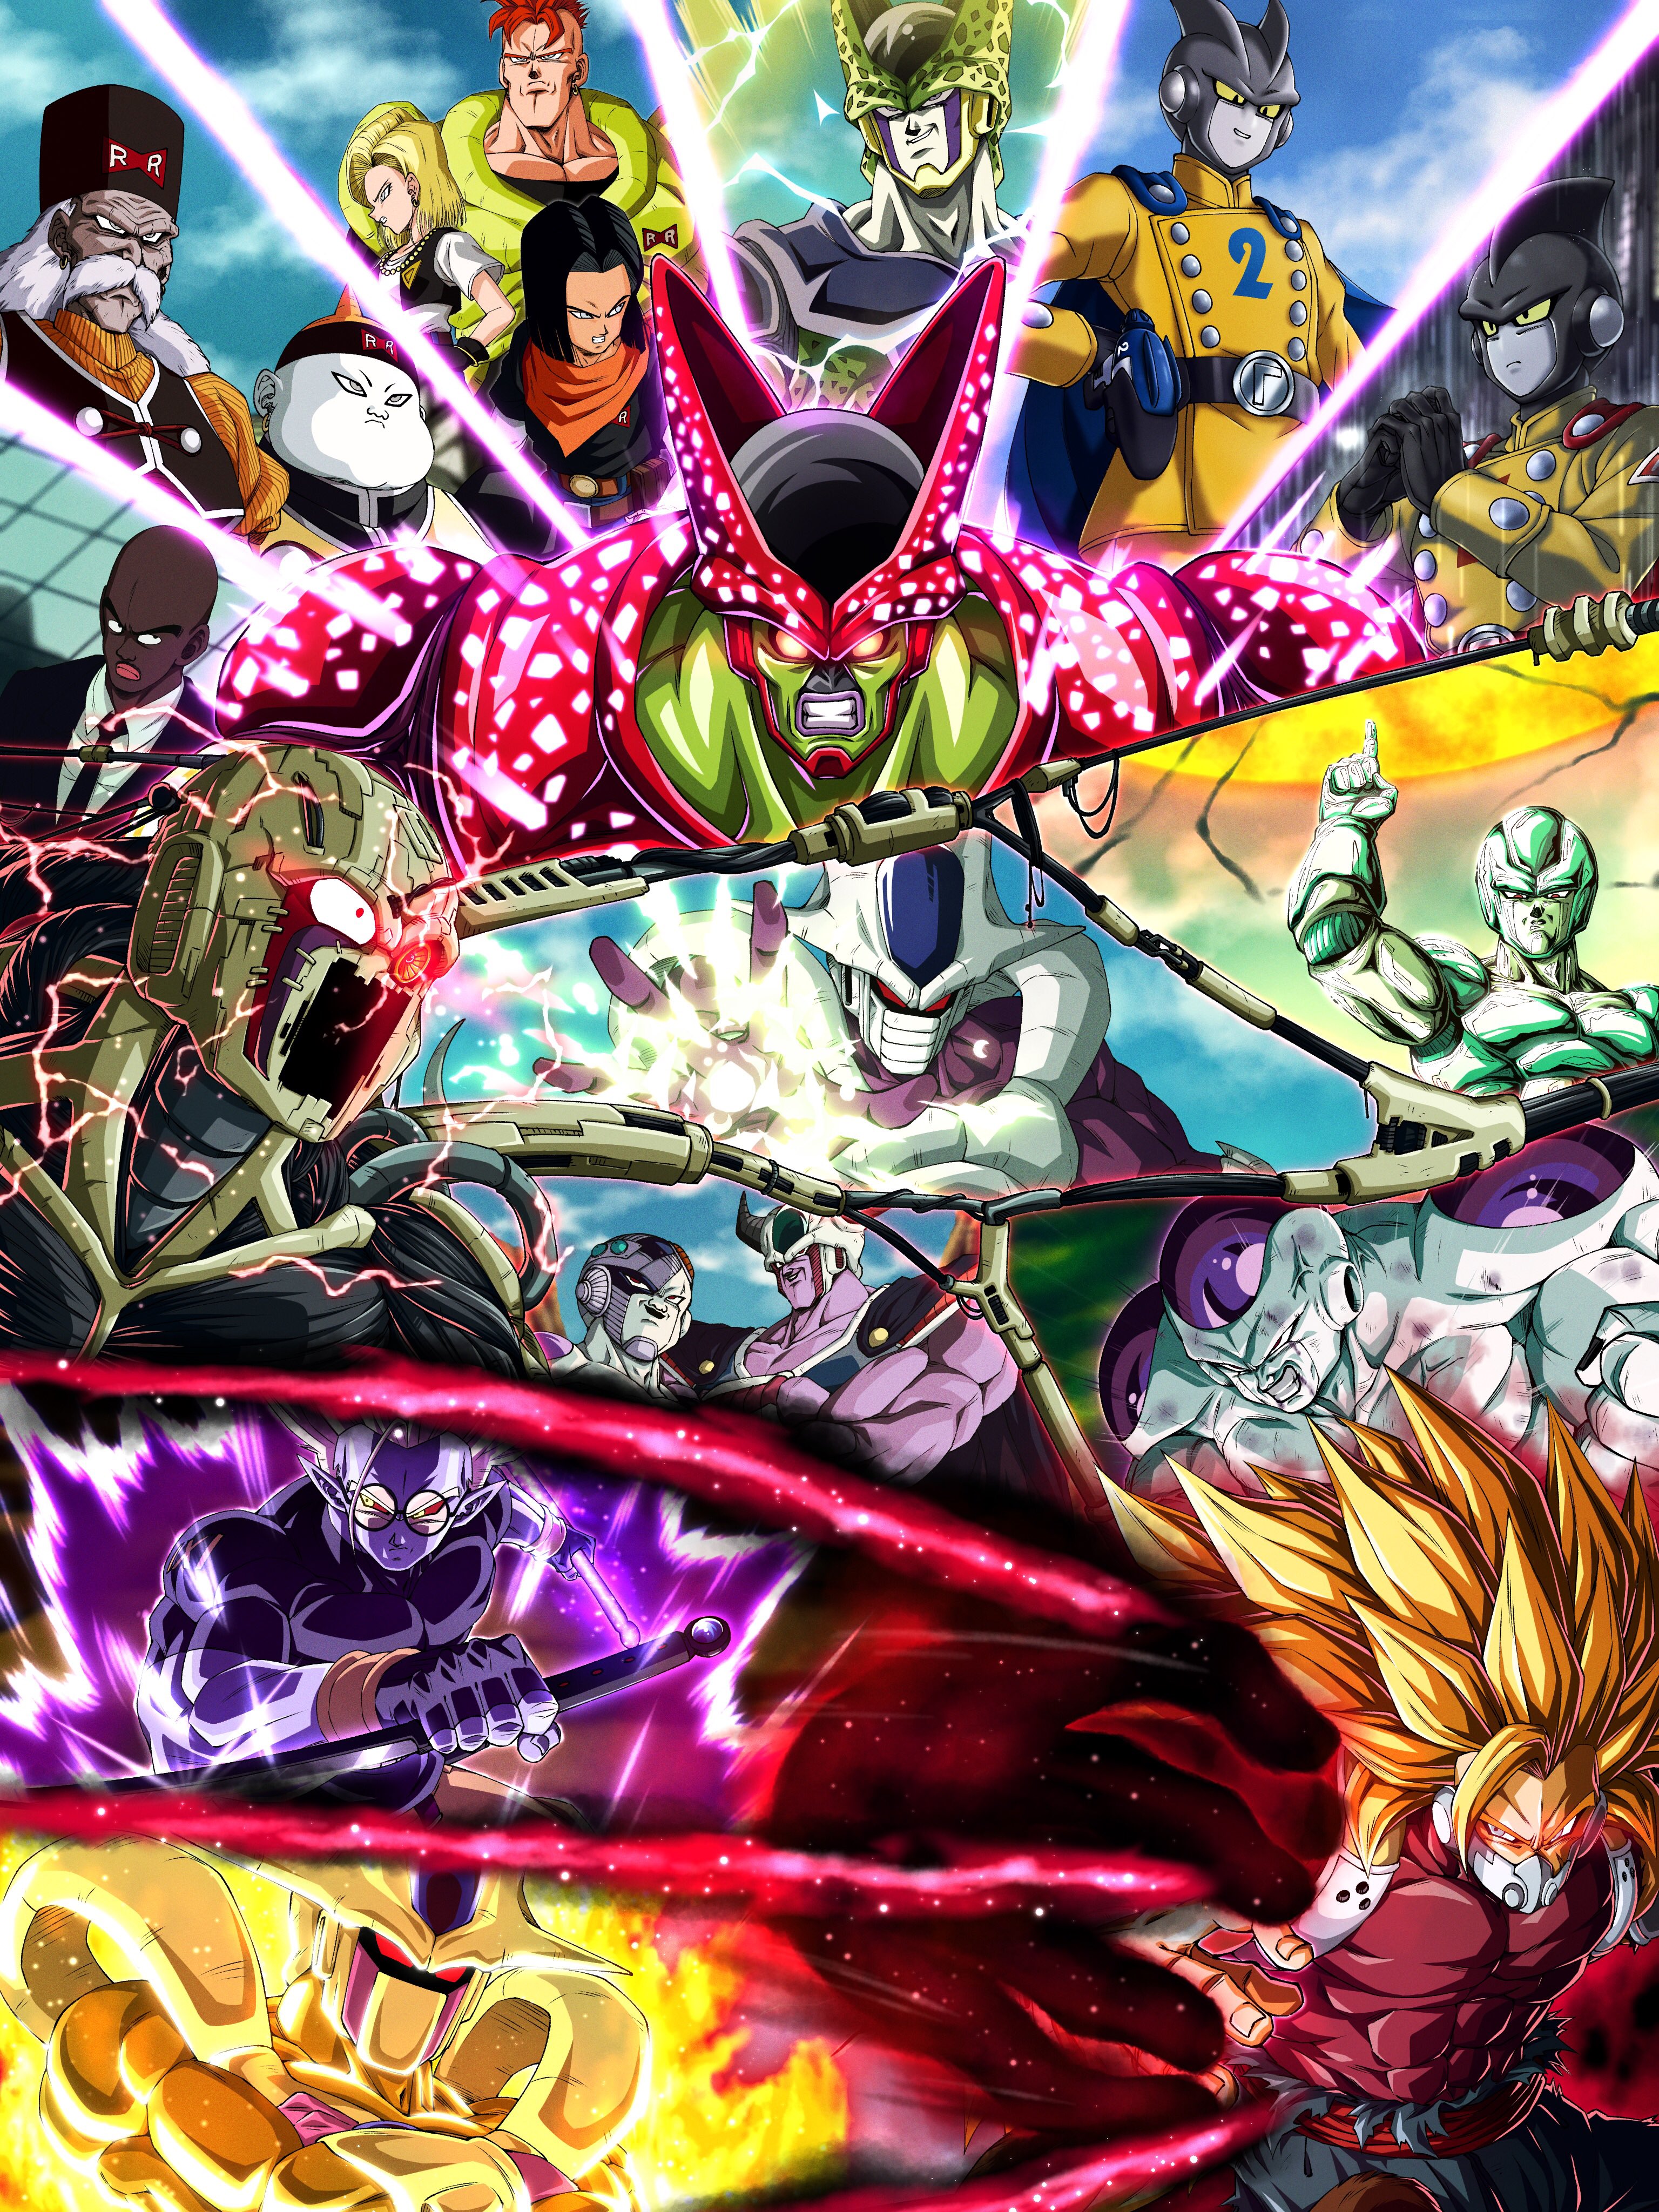 android 18, frieza, cell, android 17, perfect cell, and 13 more